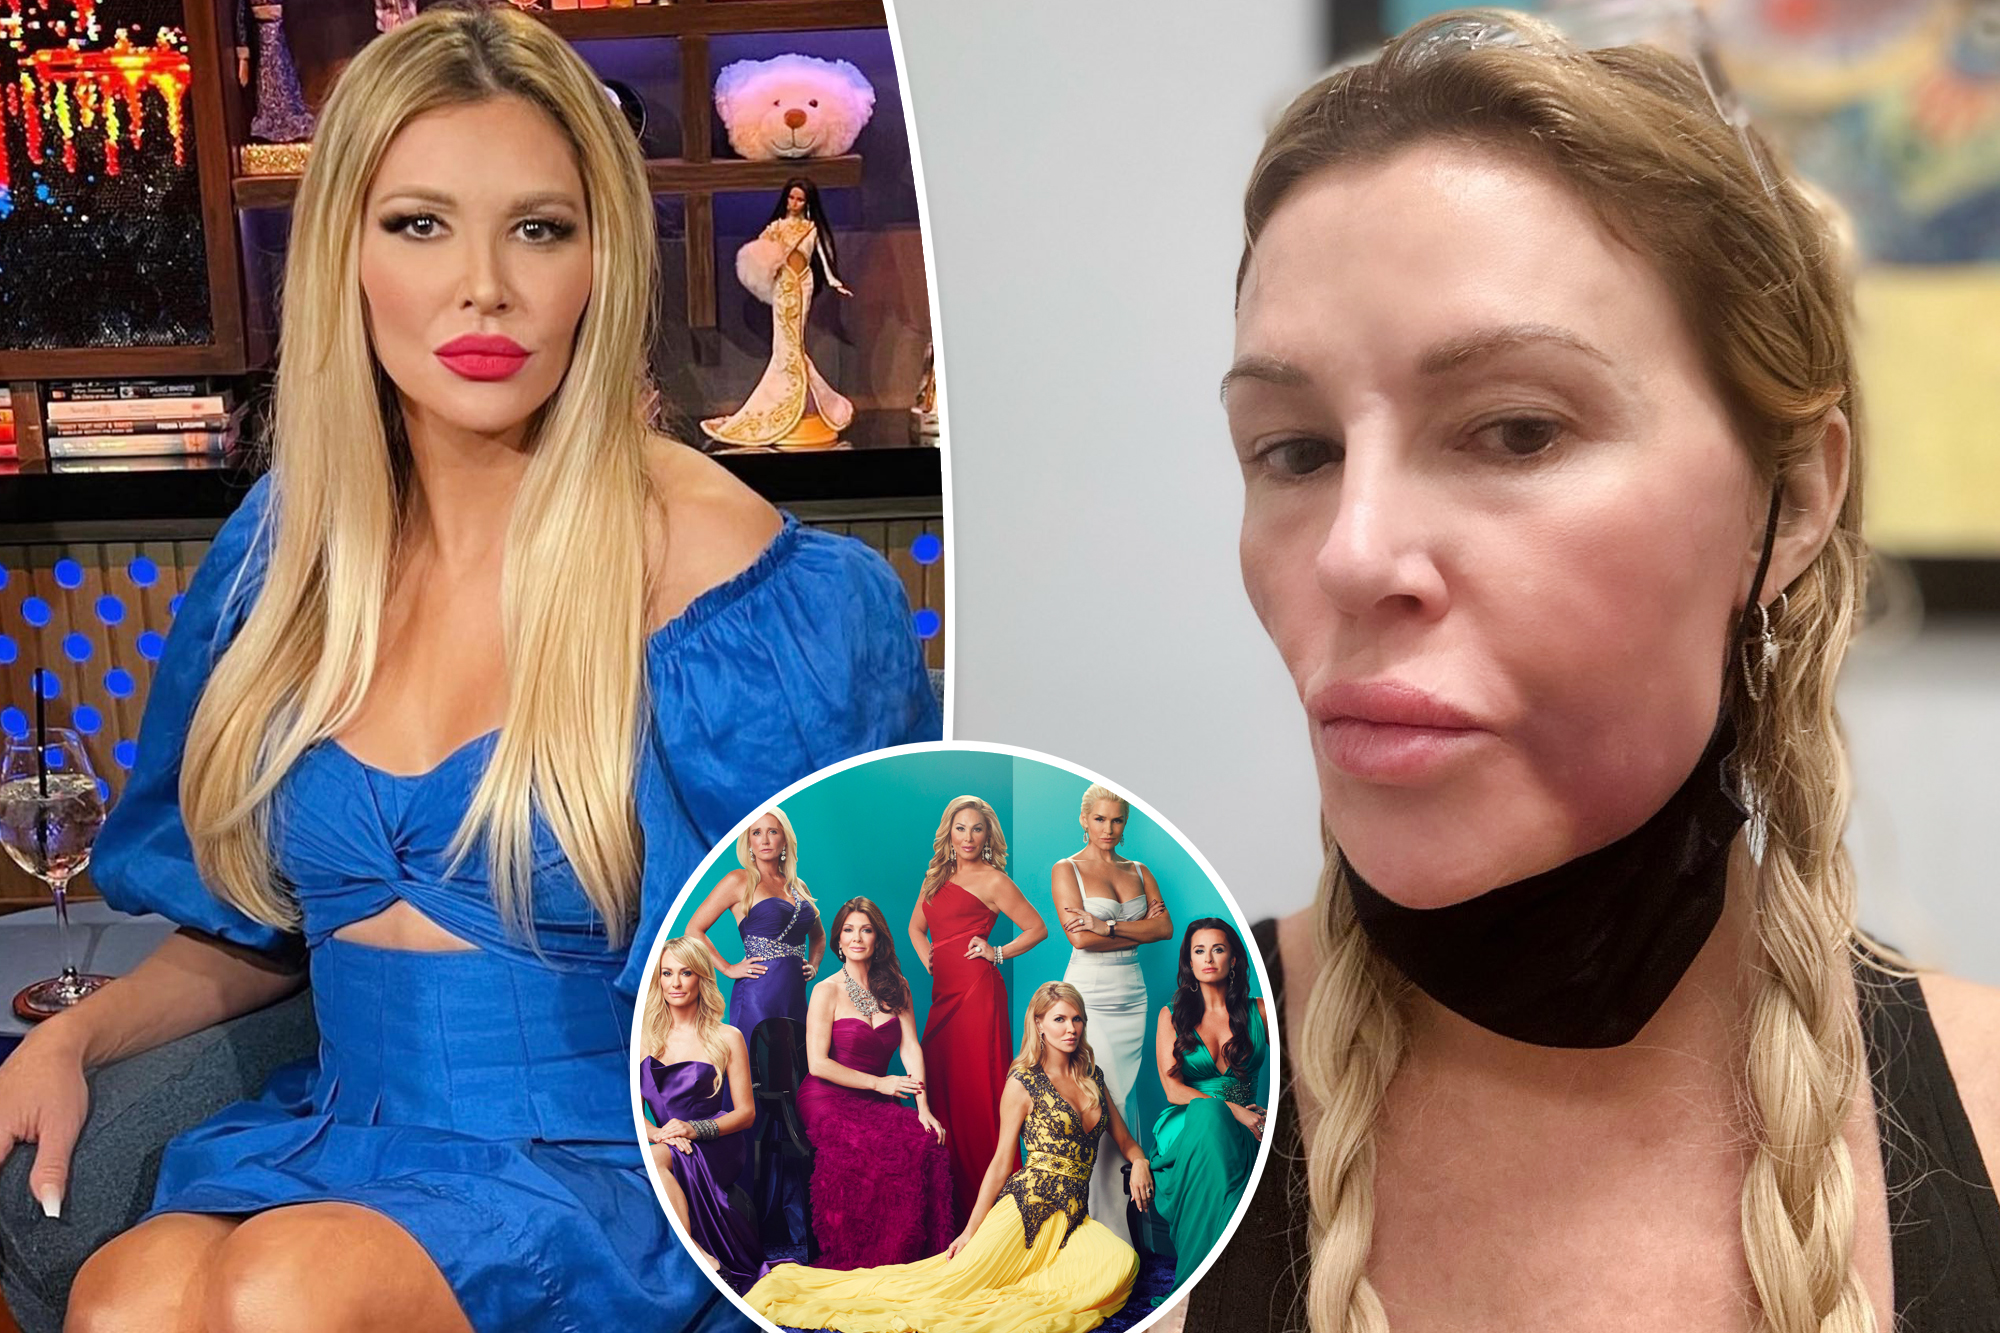 Brandi Glanville's Shocking Facial Transformation: The Real Story Behind Her Swollen Face